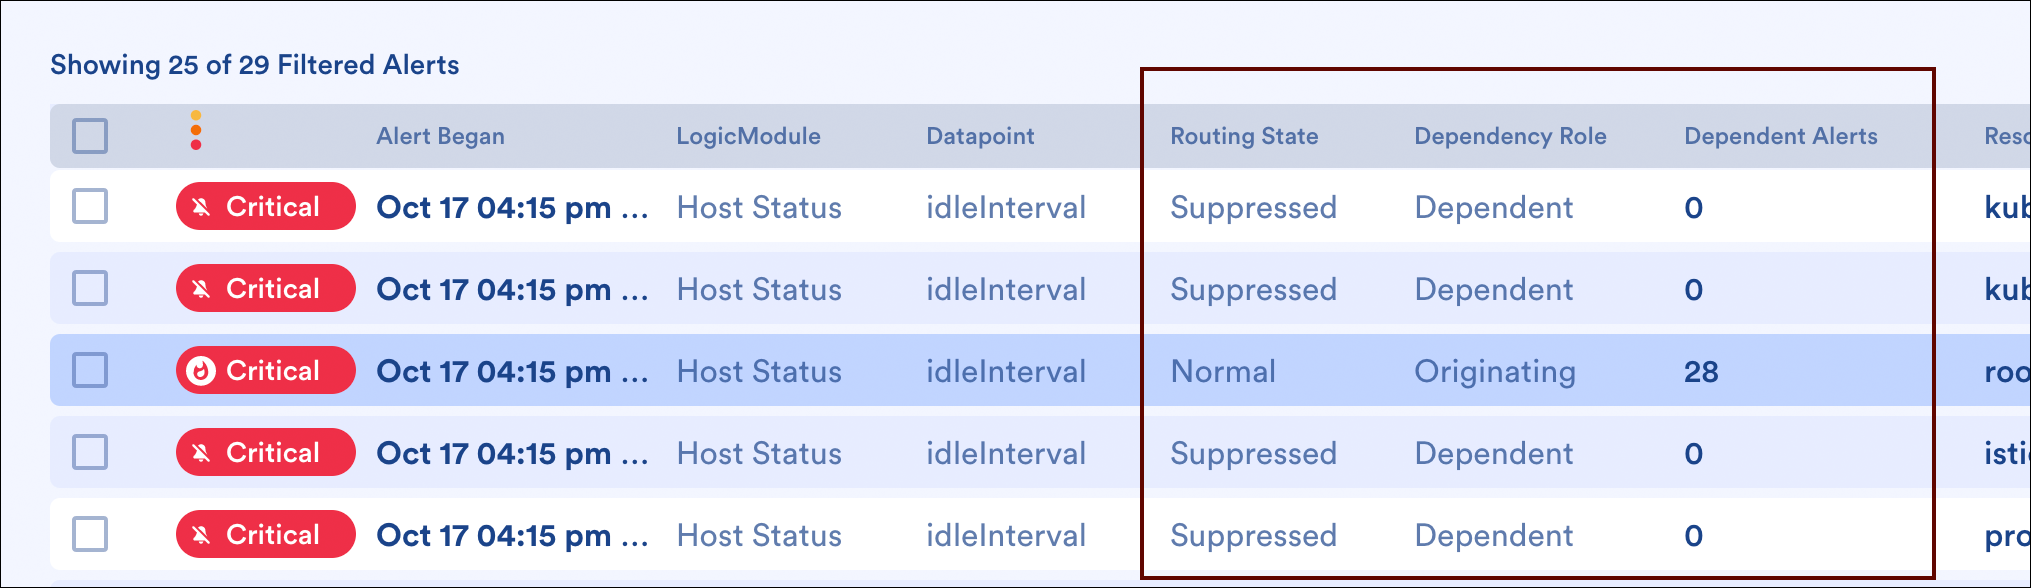 Additional data is assigned to alerts that undergo root cause analysis